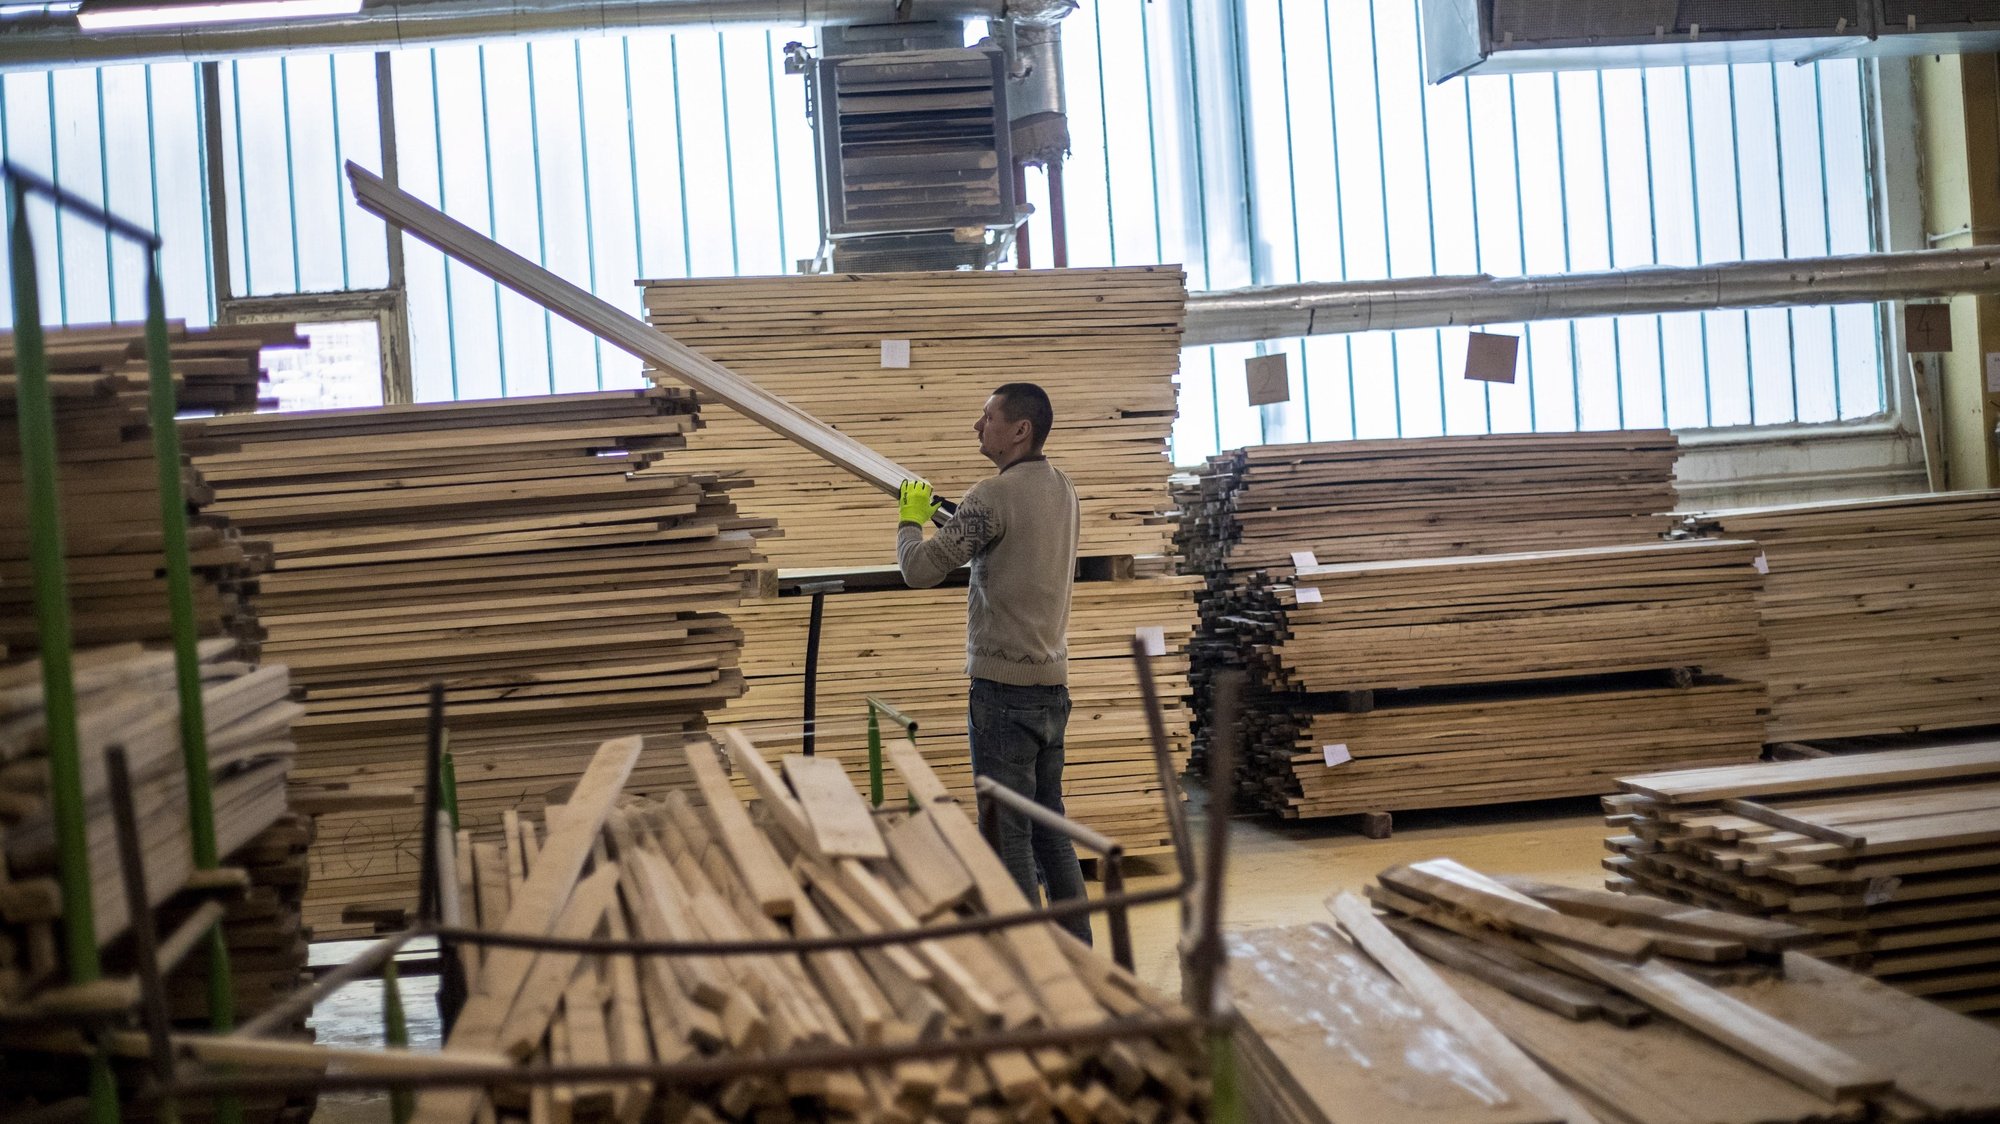 epa09007207 A worker carries timber for coffins at the Setora coffin factory in Pocatky, Czech Republic, 11 February 2021 (issued 12 February 2021). The town of Pocatky (Czech for ‘Beginnings’) is, perhaps ironically, home to the country’s largest manufacturer of coffins, Setora, which in 1991 took over Lisek, a former cooperative that had been building wooden caskets since 1949. The company has seen a boost in production and sales figures since the Covid-19 pandemic struck last year, making around a hundred wooden coffins daily. The country has the world’s second highest mortality rate per 100,000 people, according to Johns Hopkins University.  EPA/MARTIN DIVISEK